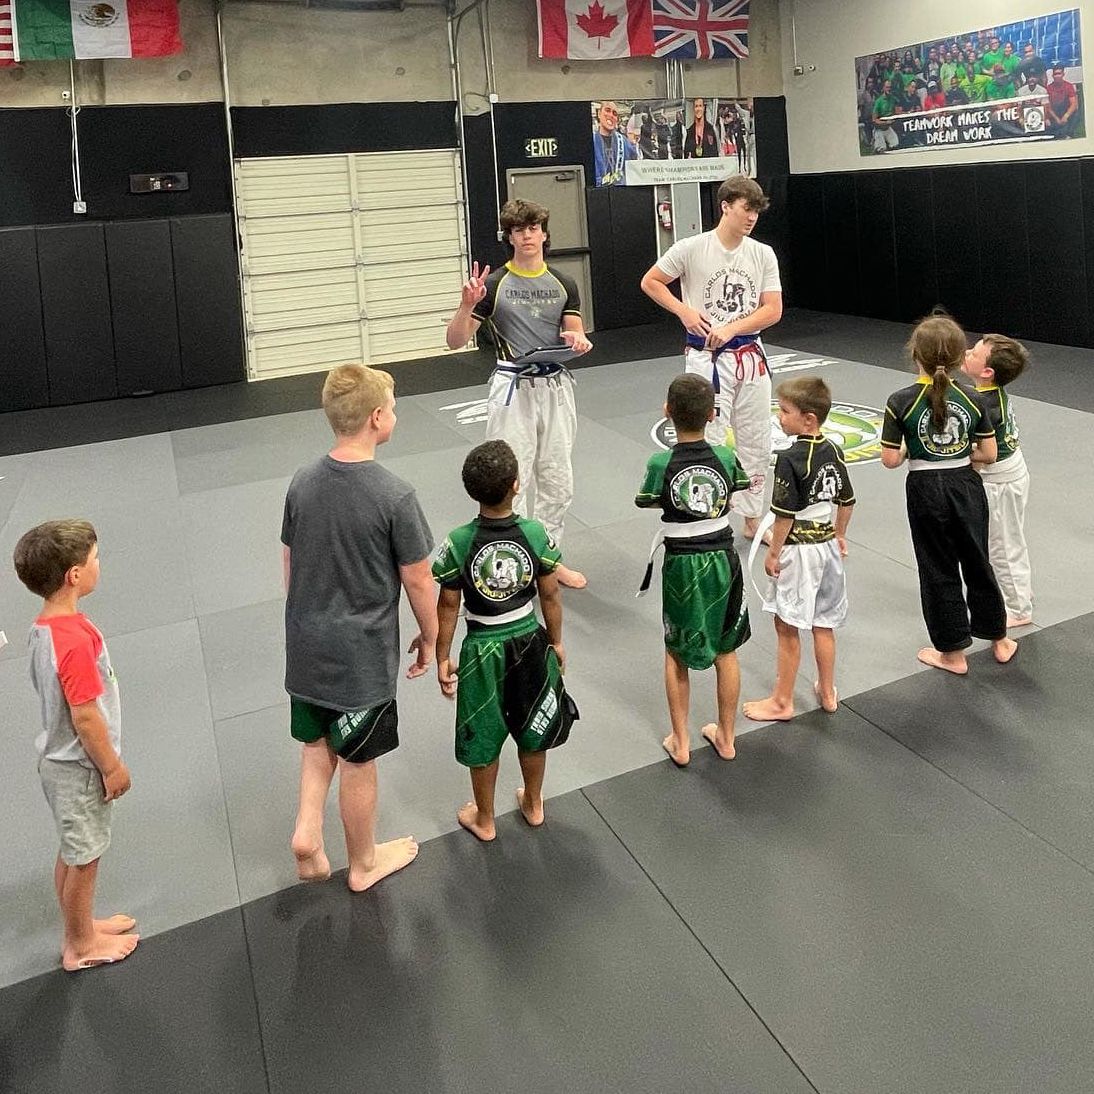 A group of children are standing on a mat in a gym.